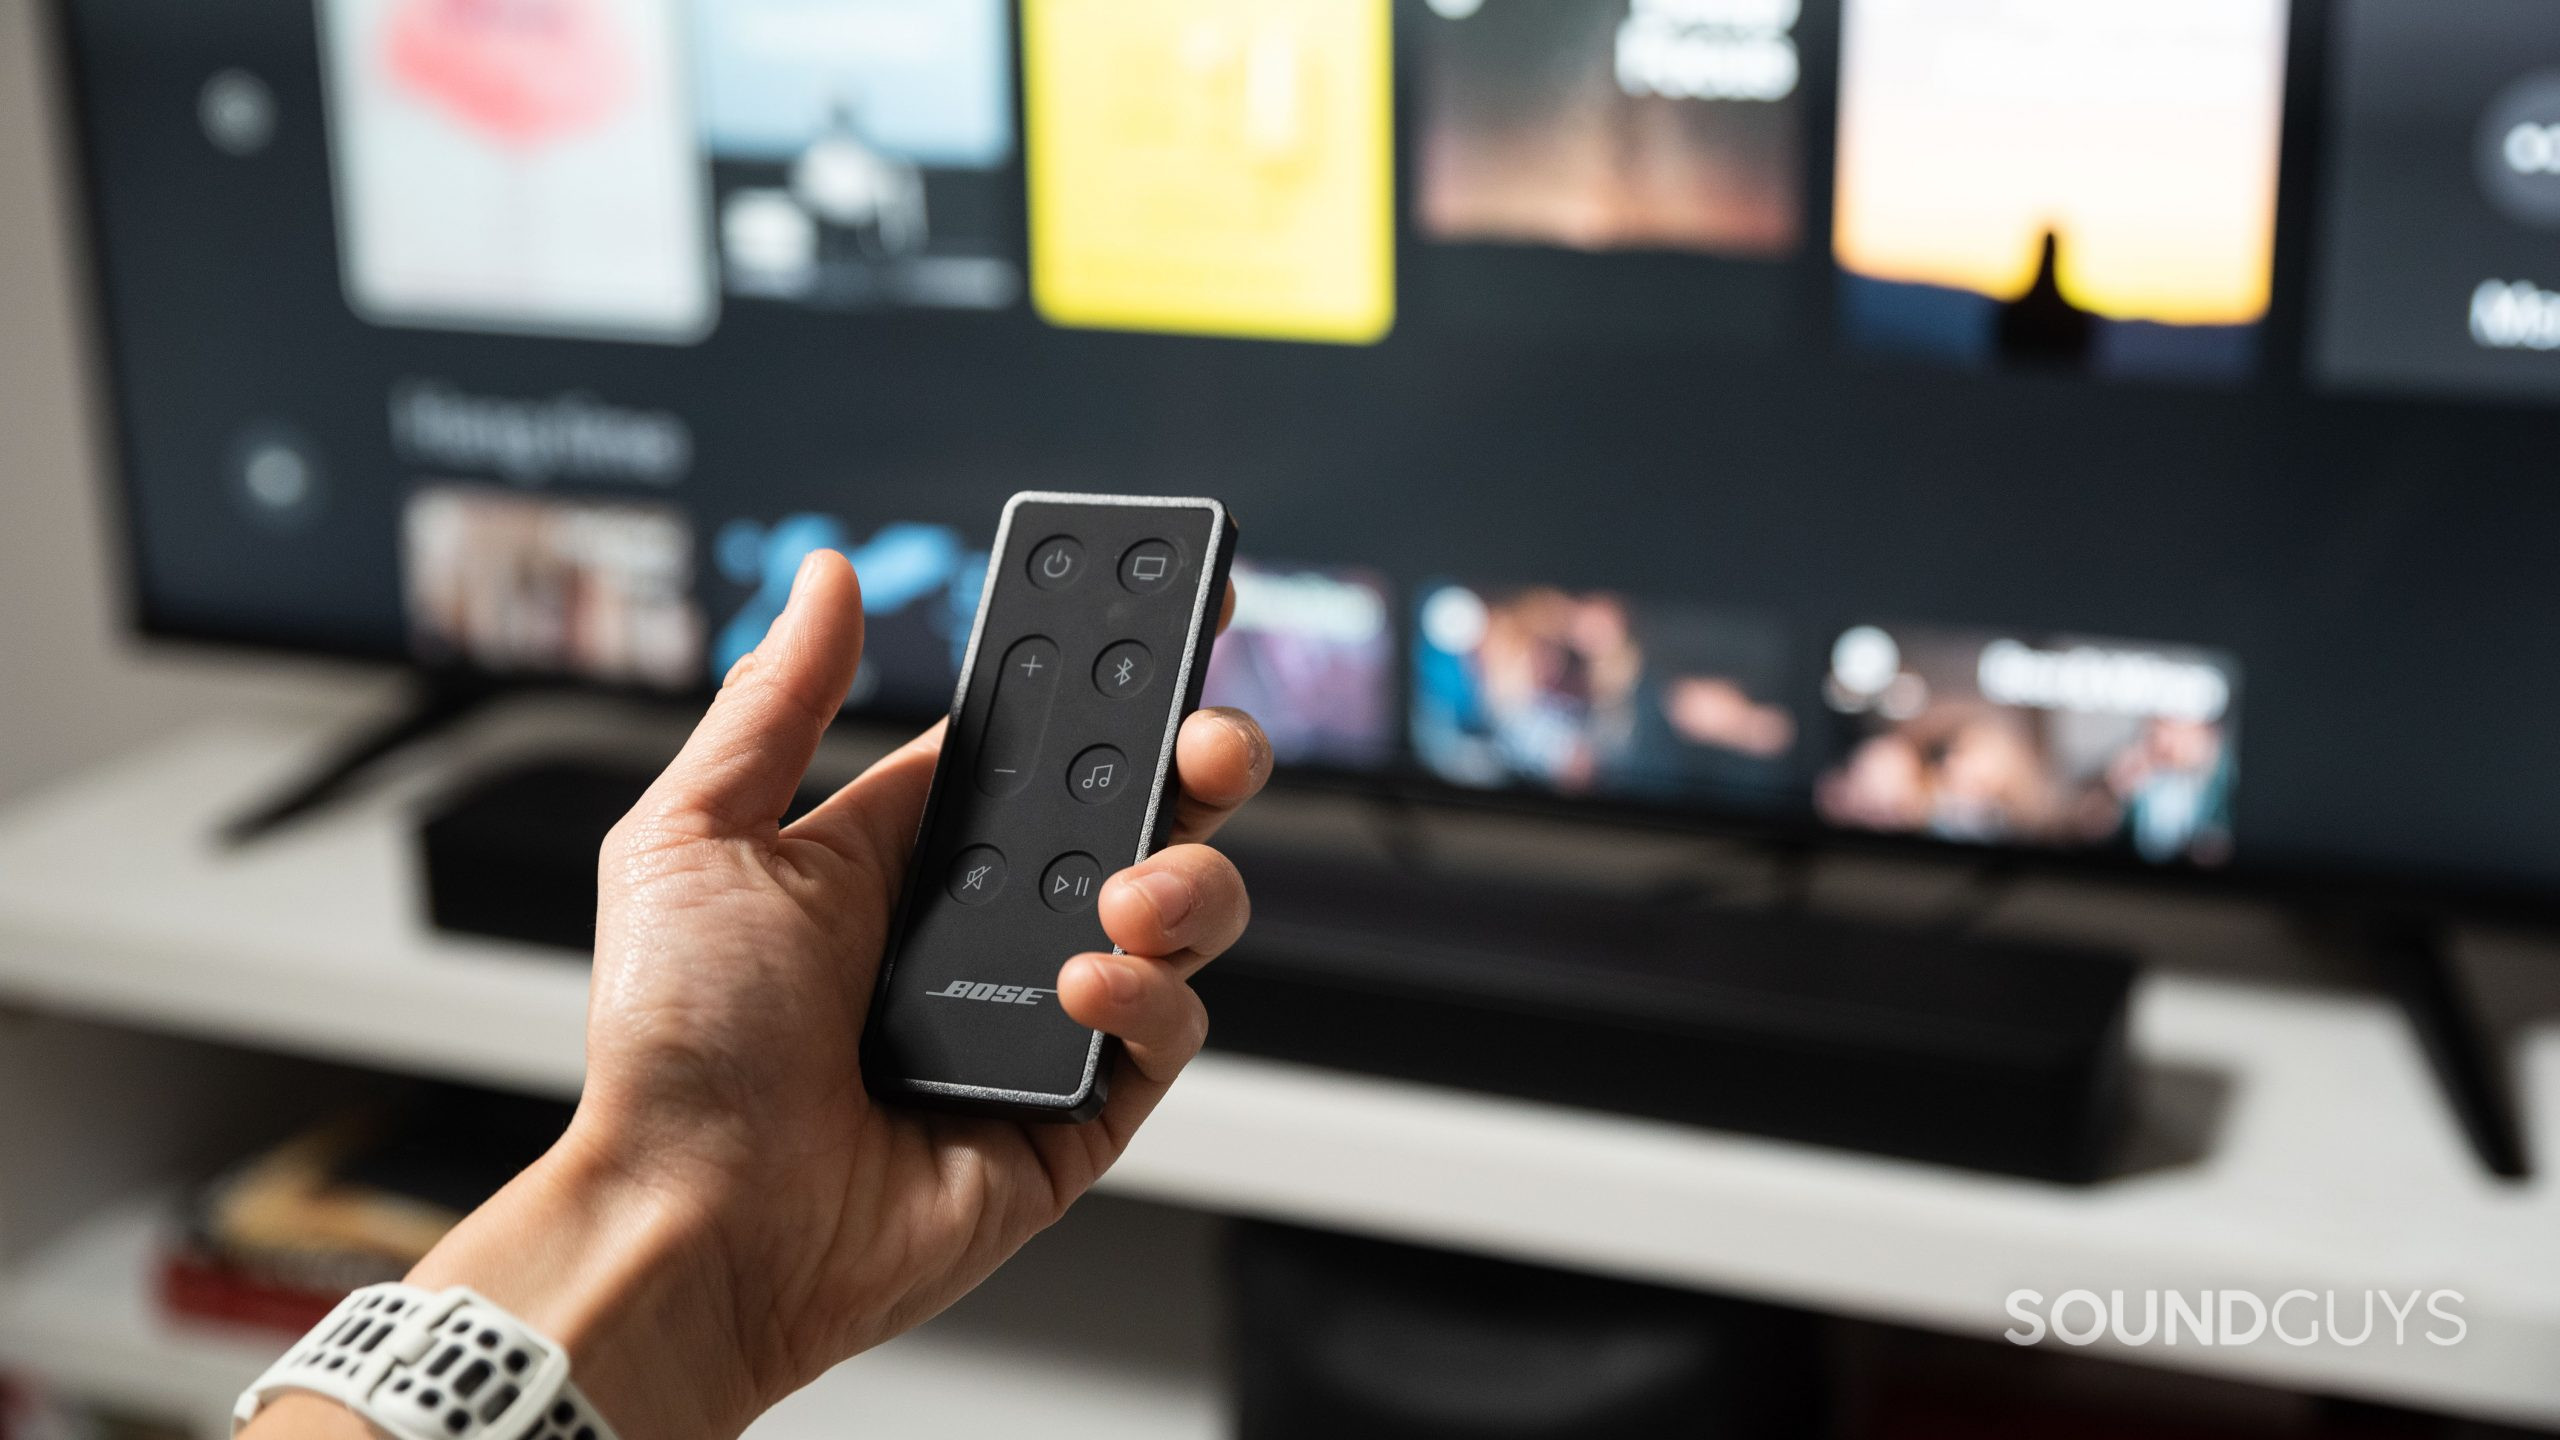 A hand holds the Bose Smart Soundbar 600 remote while pointing it at a TV.